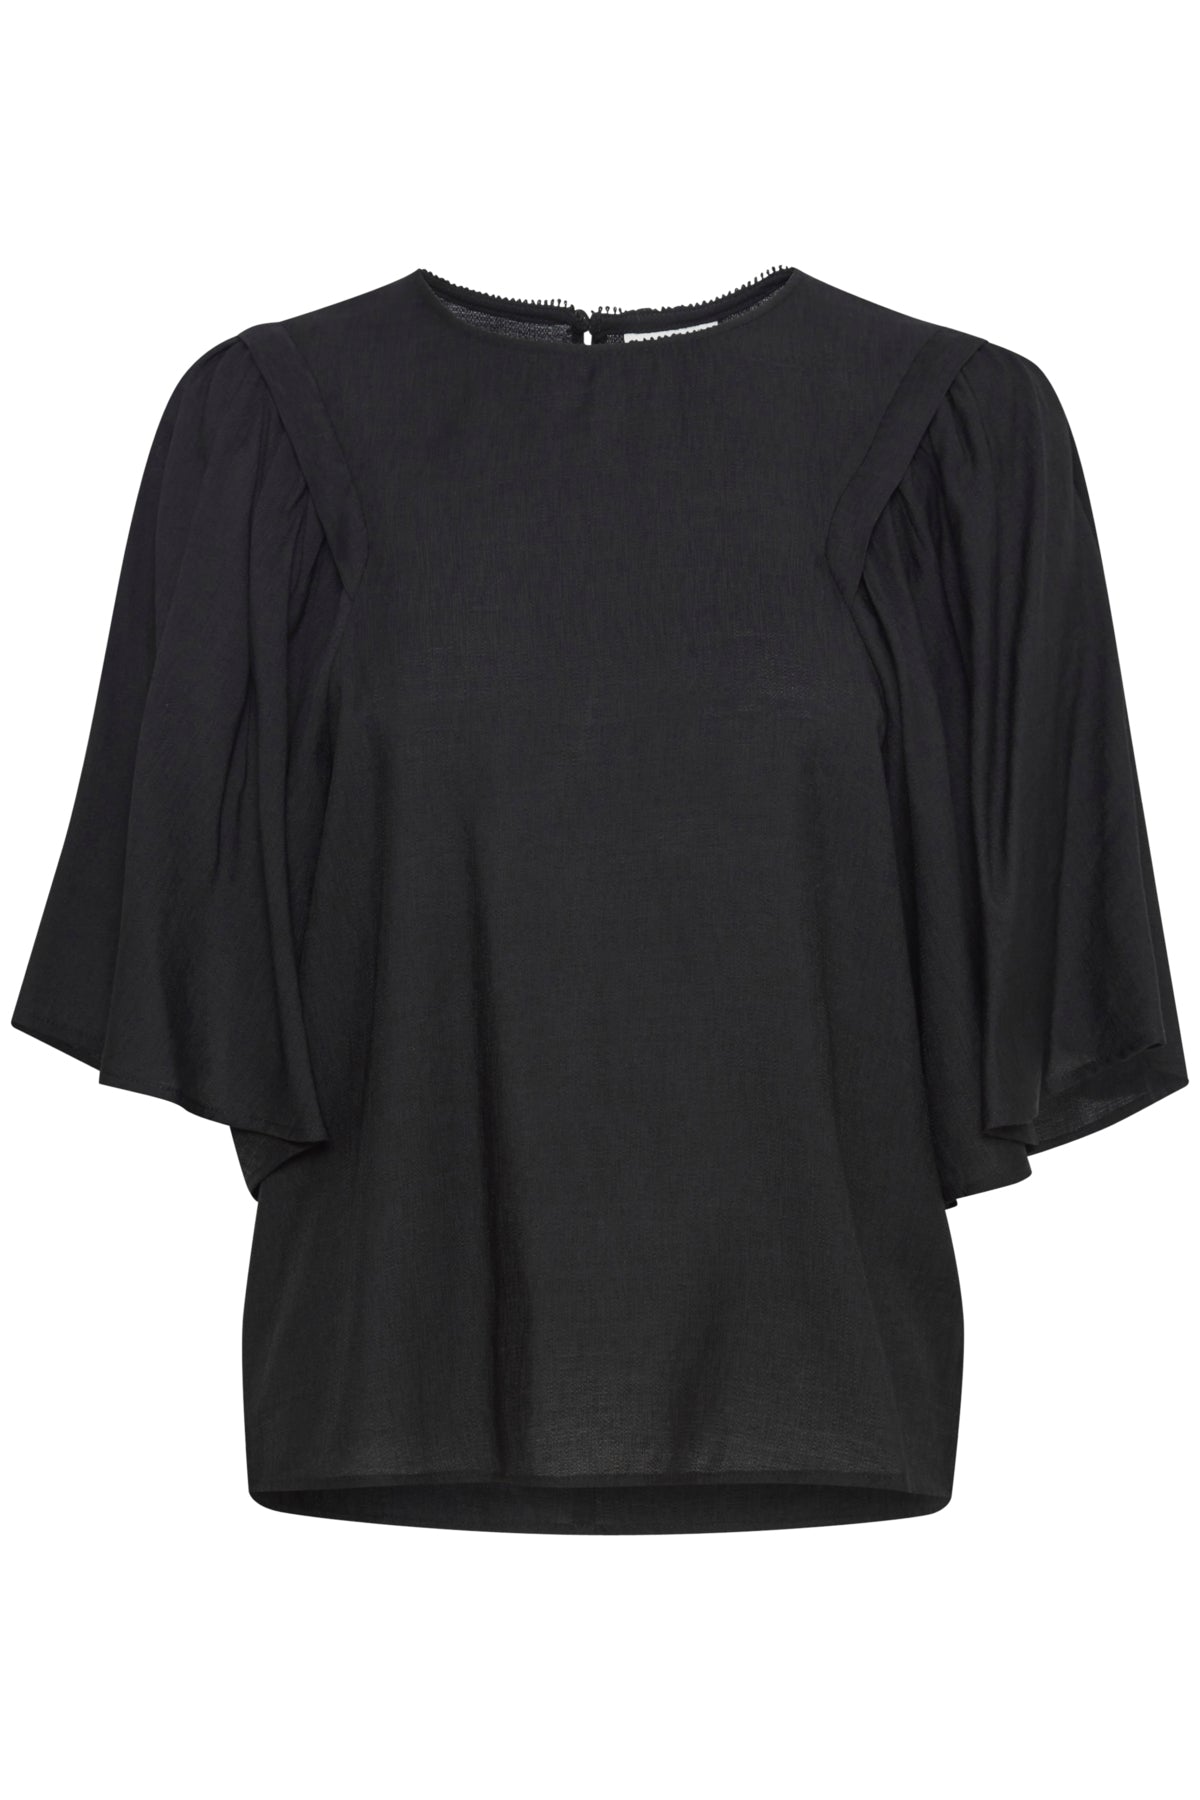 Quilla Blouse in Black